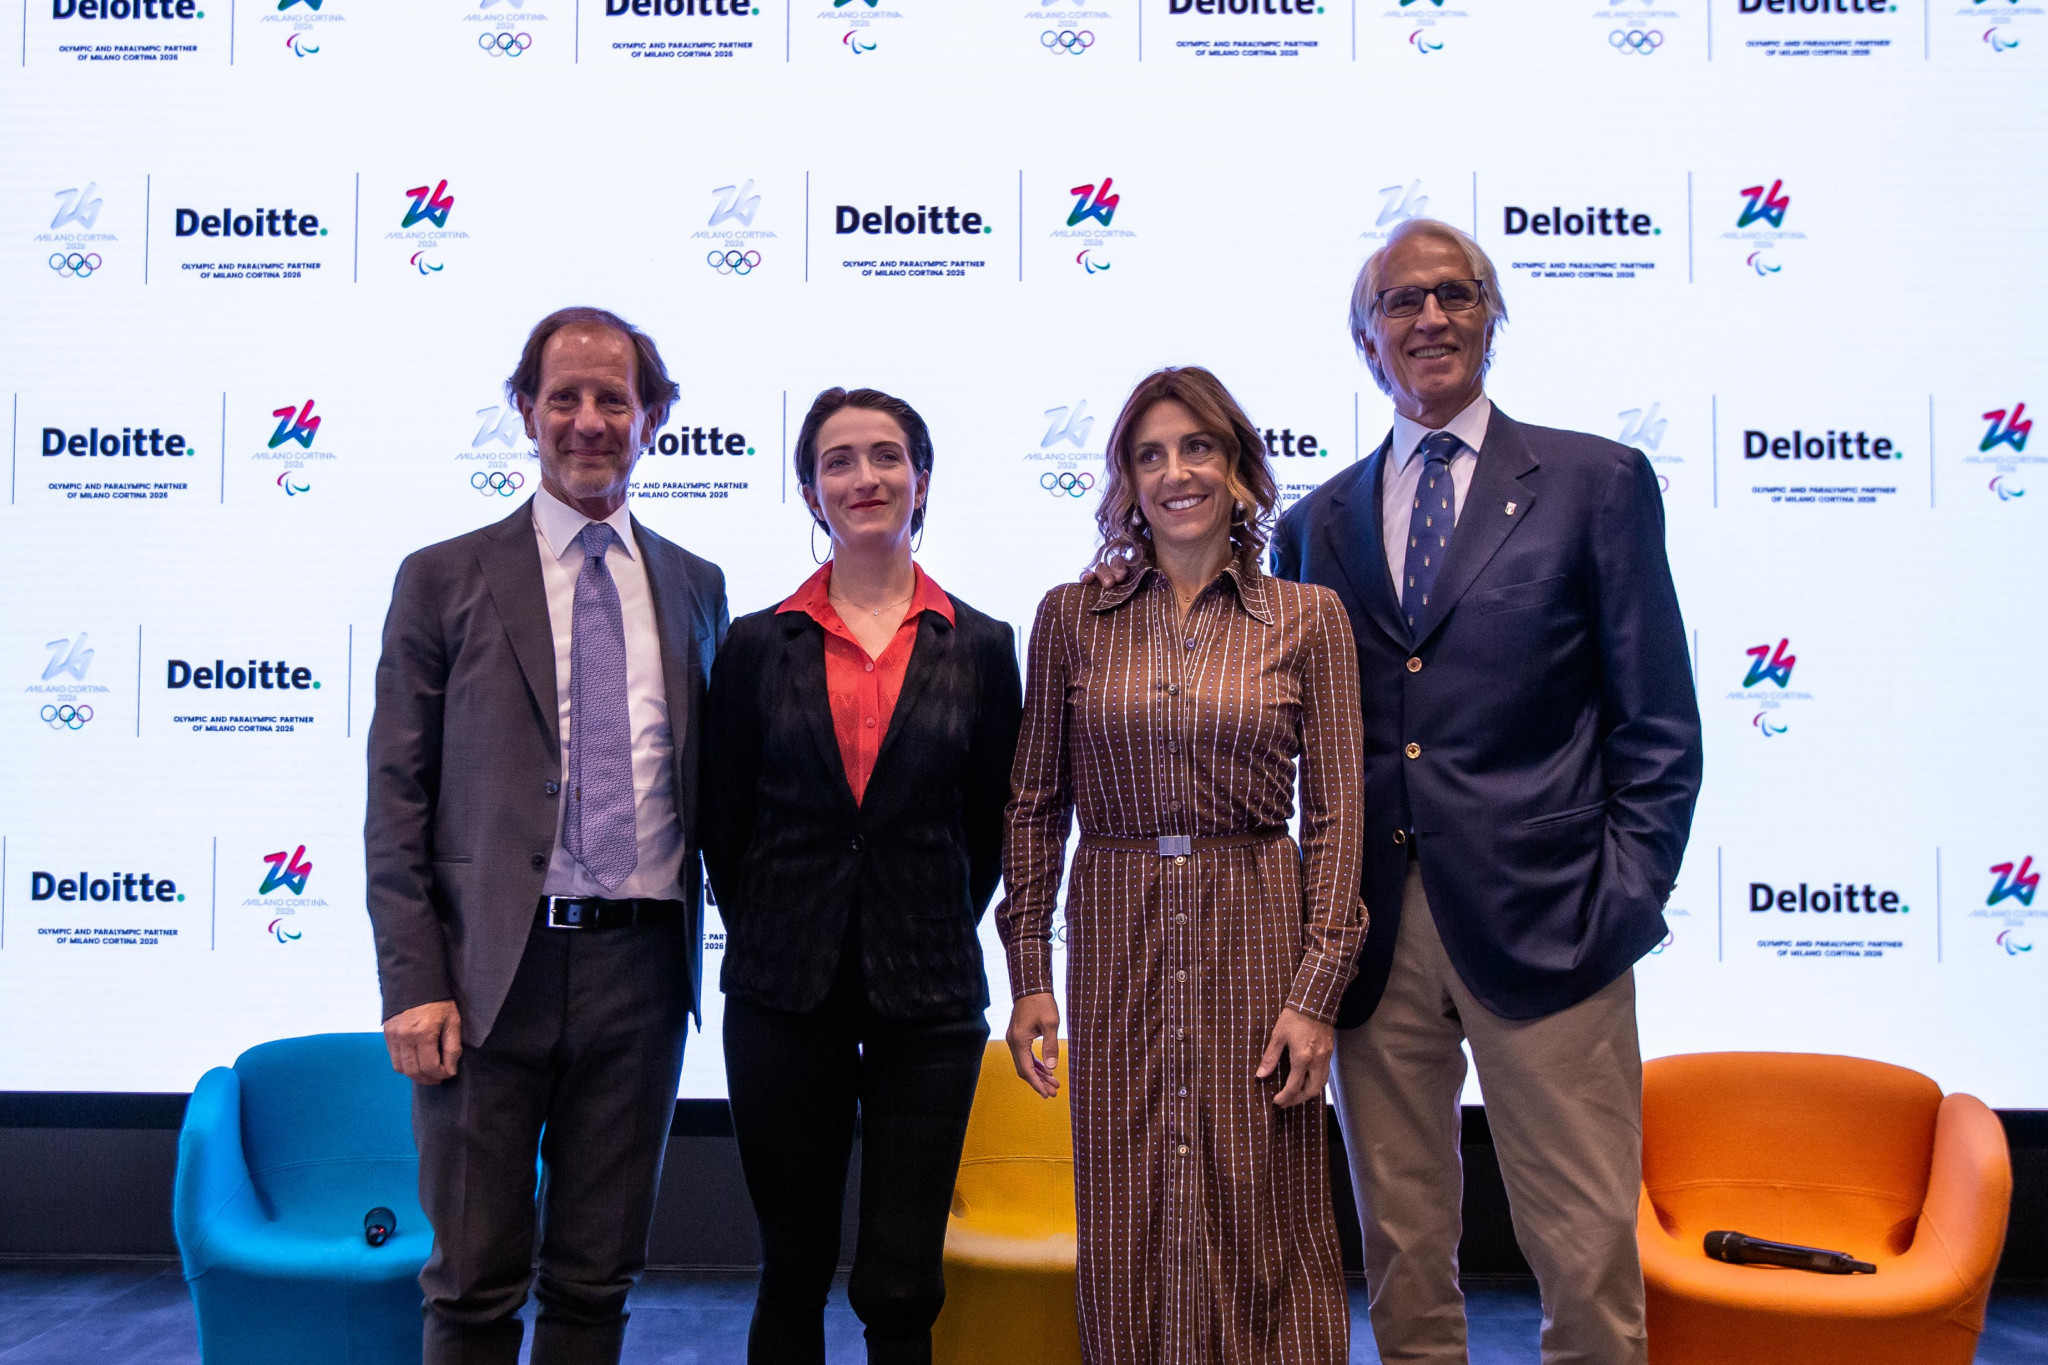 Double Paralympic gold medallist Martina Caironi, second from left, and triple Olympic Alpine skiing champion Deborah Compagnoni, second from right, helped celebrate the sponsorship deal ©Milan Cortina 2026